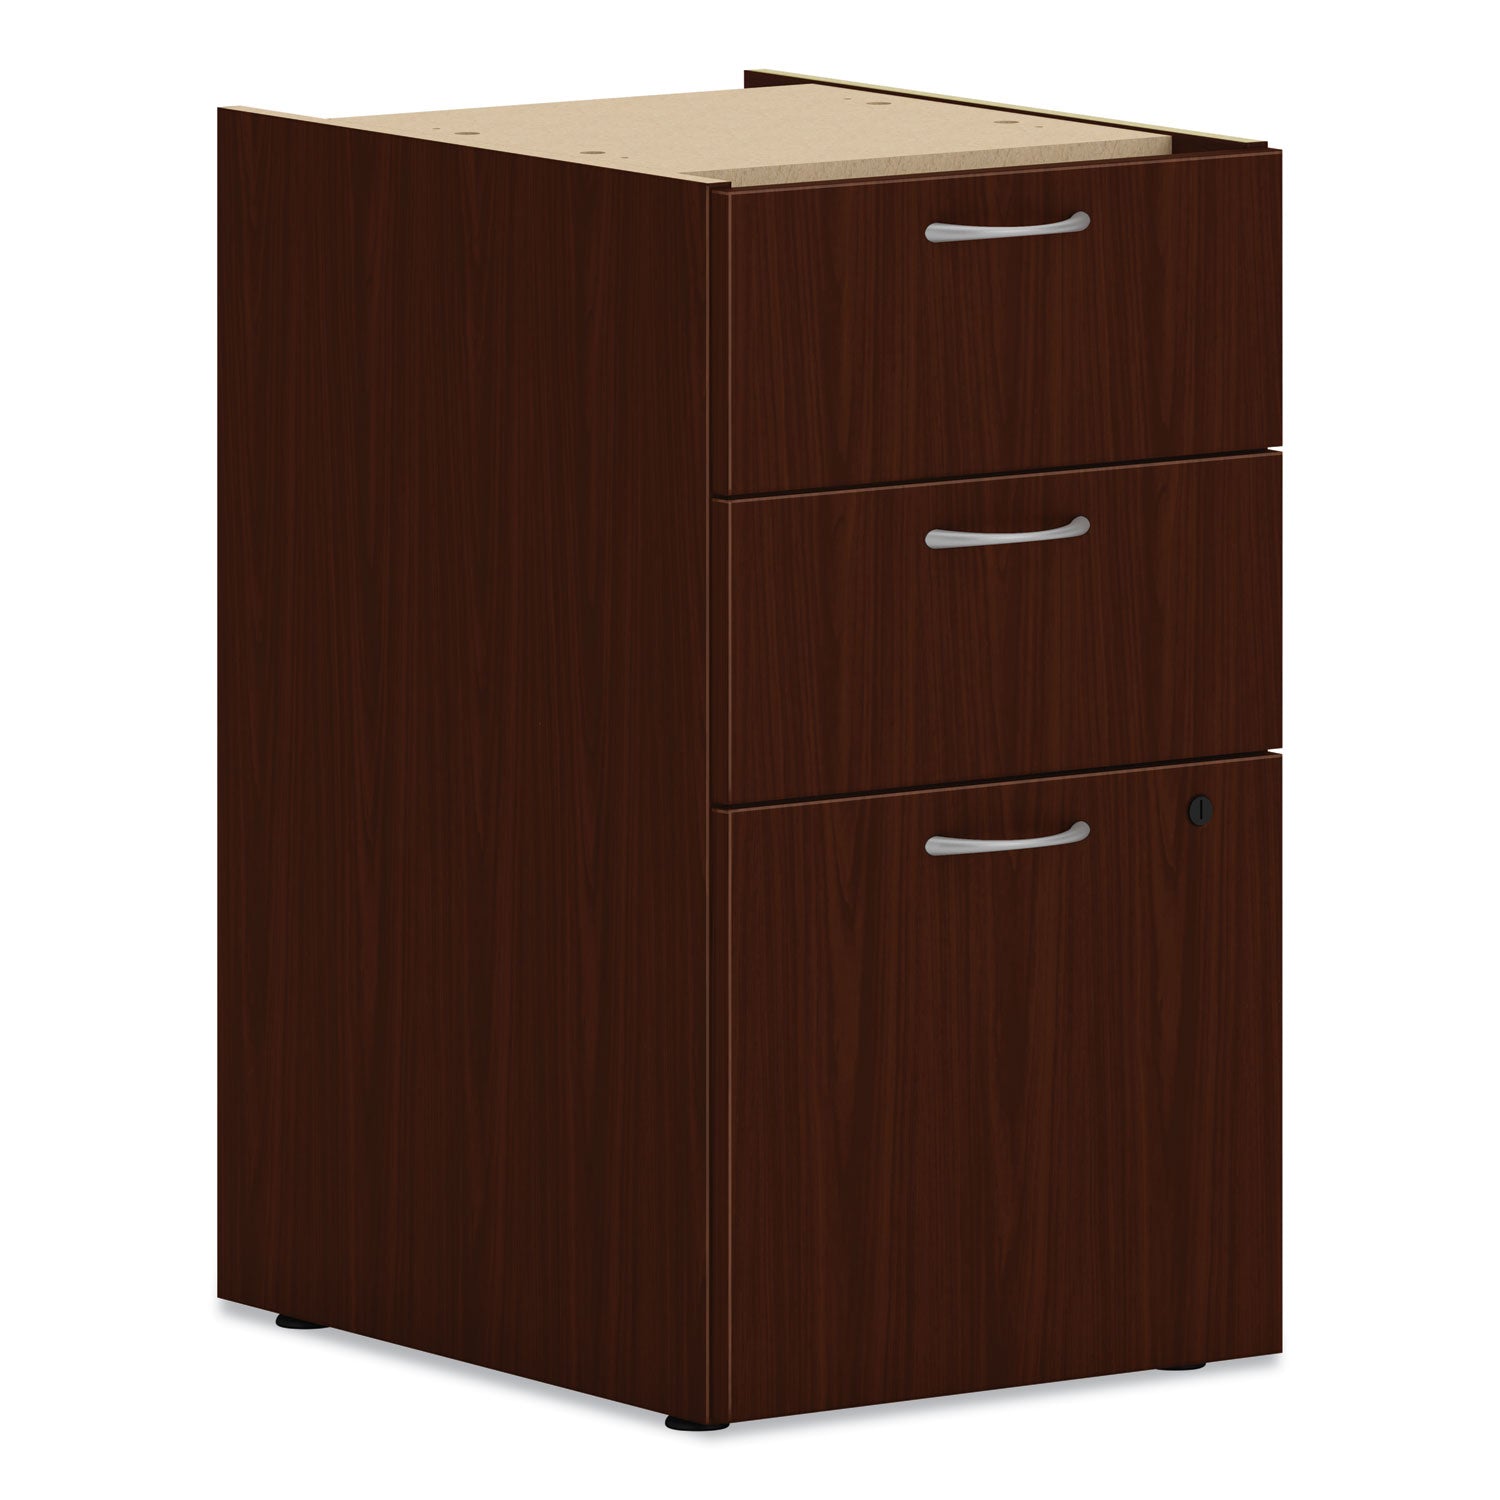 mod-support-pedestal-left-or-right-3-drawers-box-box-file-legal-letter-traditional-mahogany-15-x-20-x-28_honplpsbbflt1 - 1